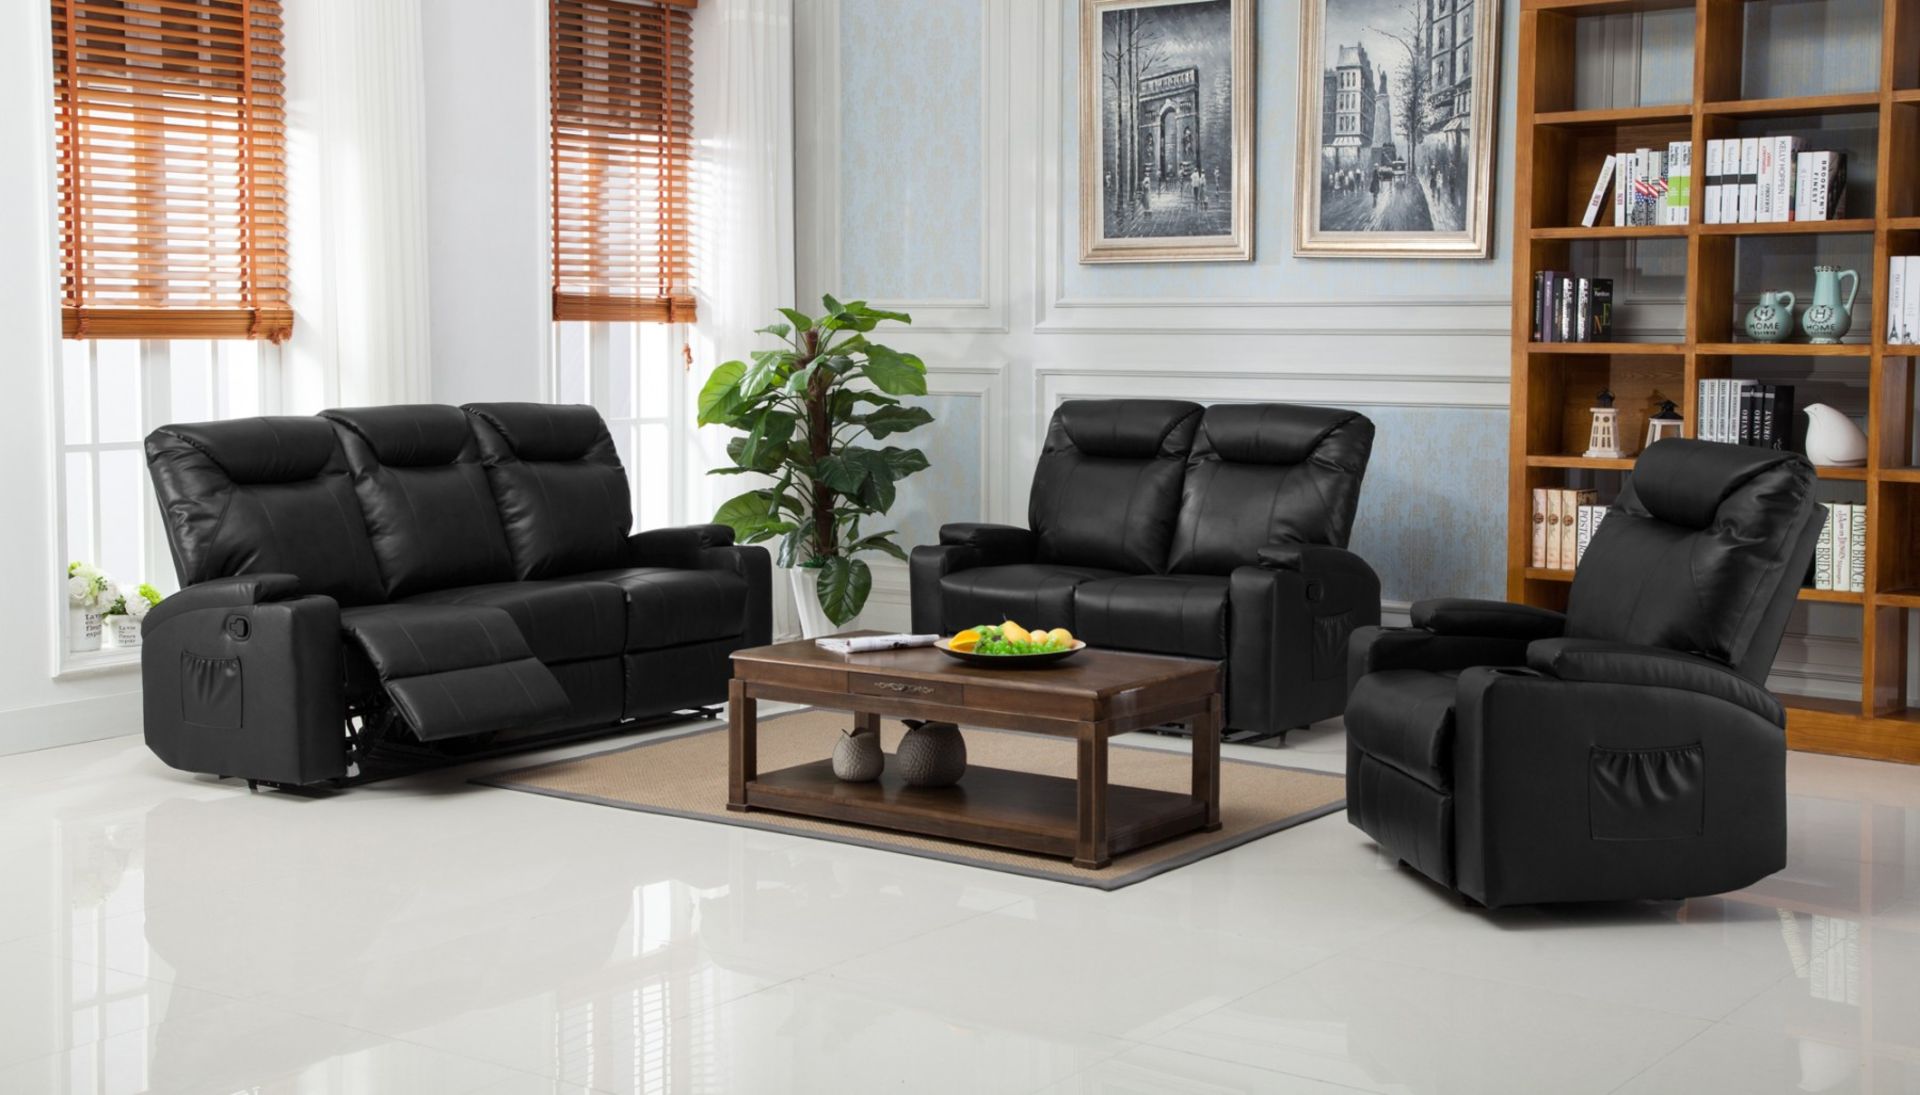 Brand New Boxed 3 Seater Plus 2 Seater Lazyboy Black Leather Electric Reclining Sofas